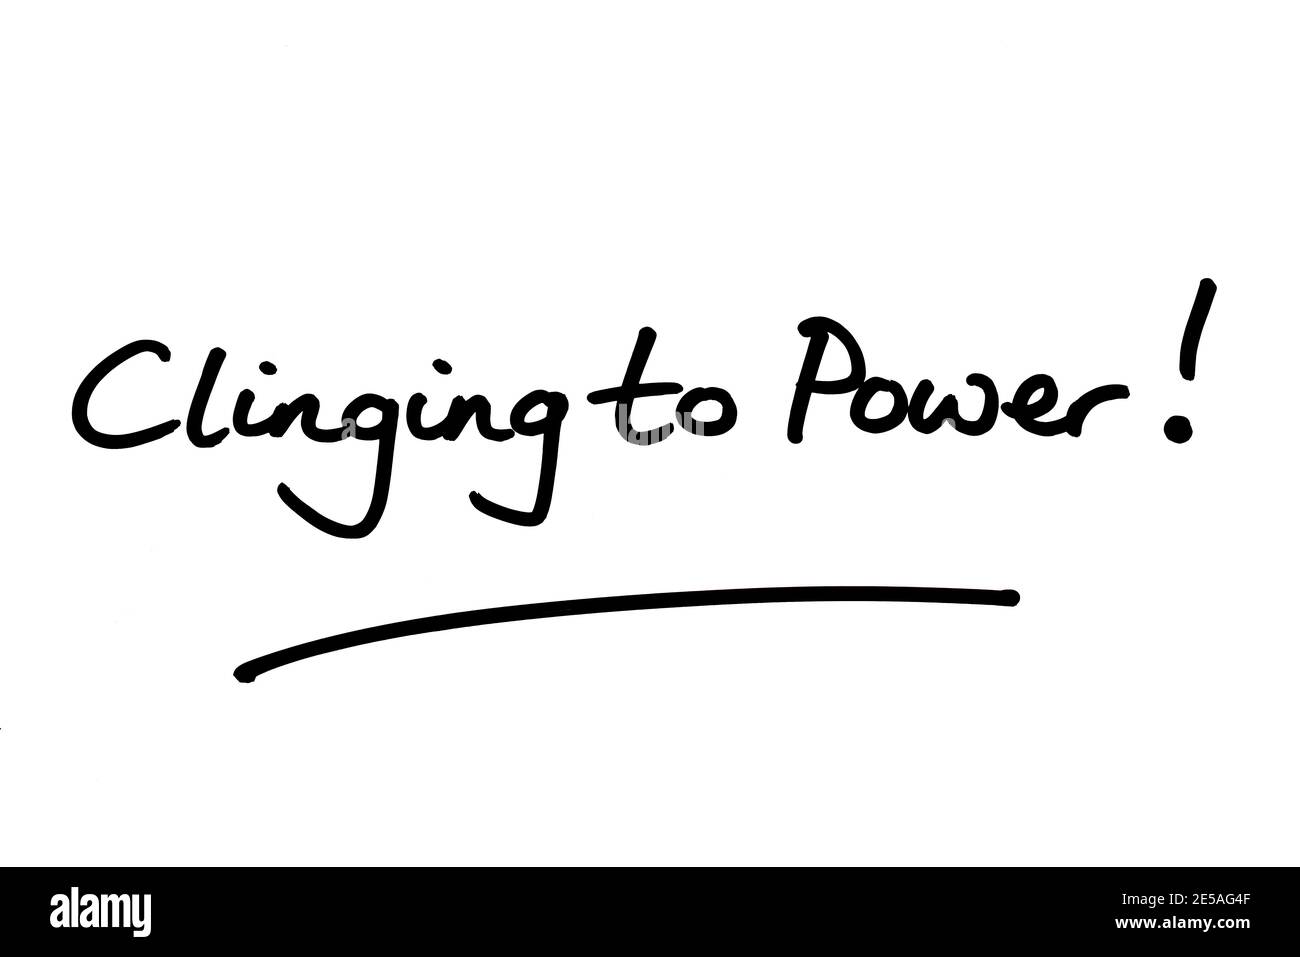 Clinging to Power! handwritten on a white background. Stock Photo